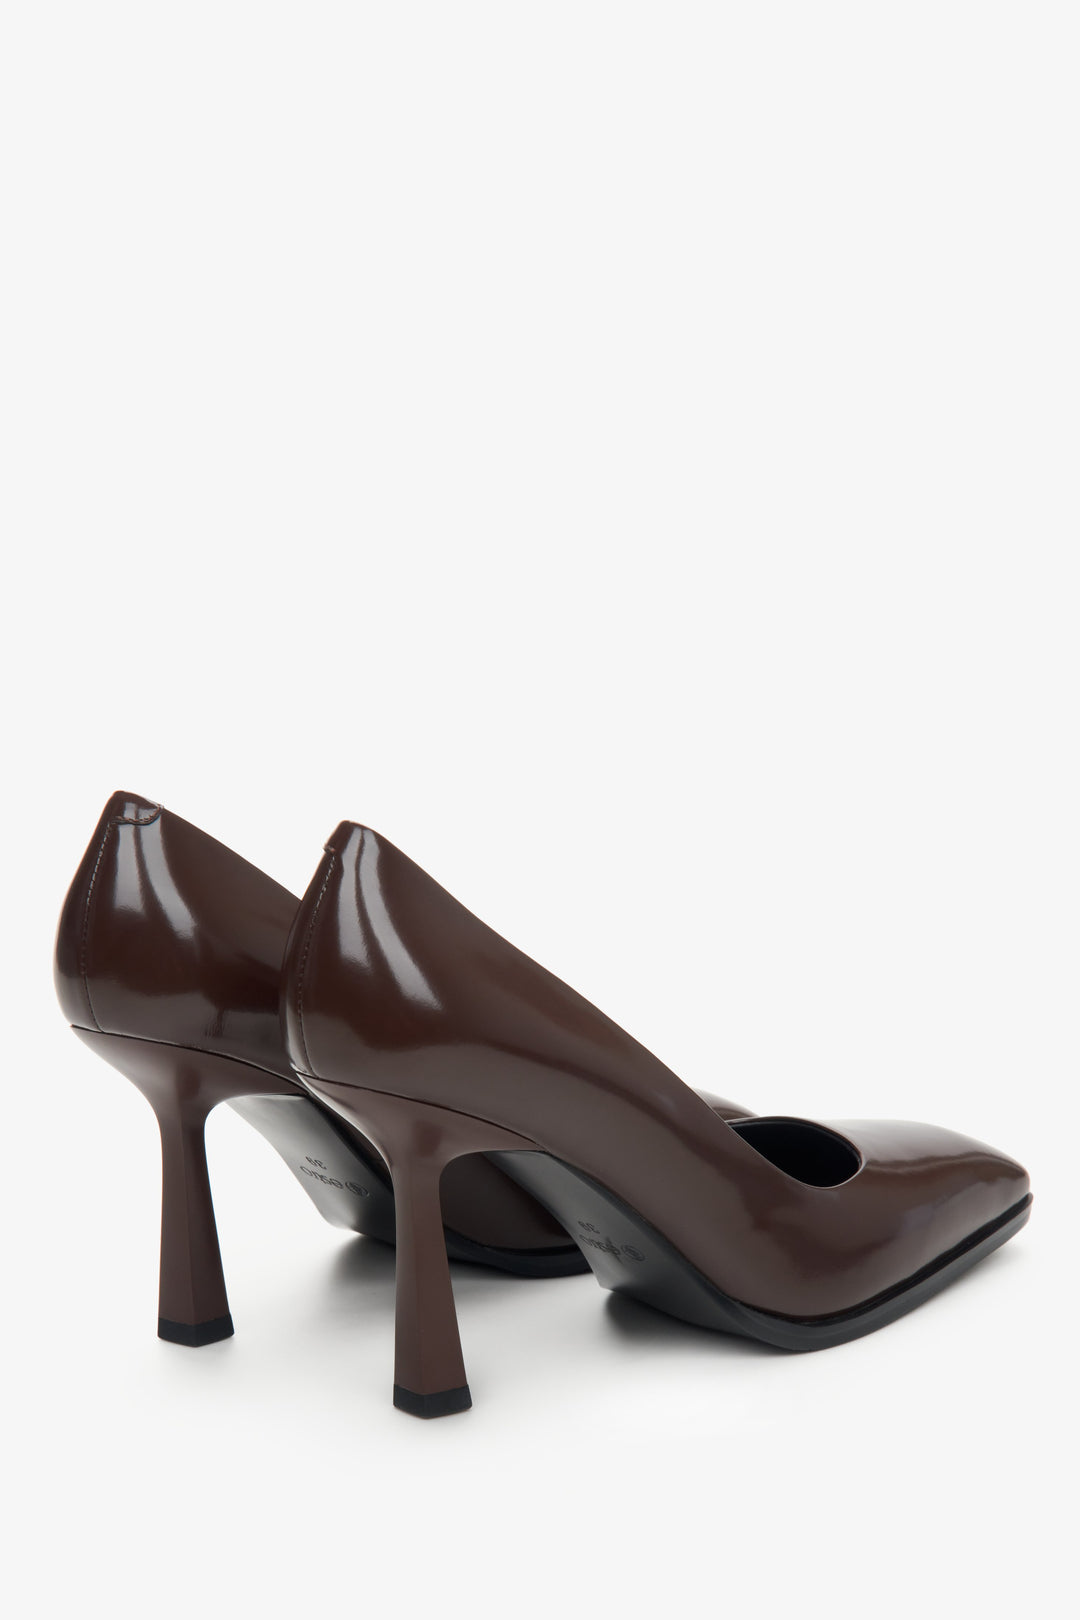 Dark brown Estro women's leather shoes with heels - close-up on the heel and side line.